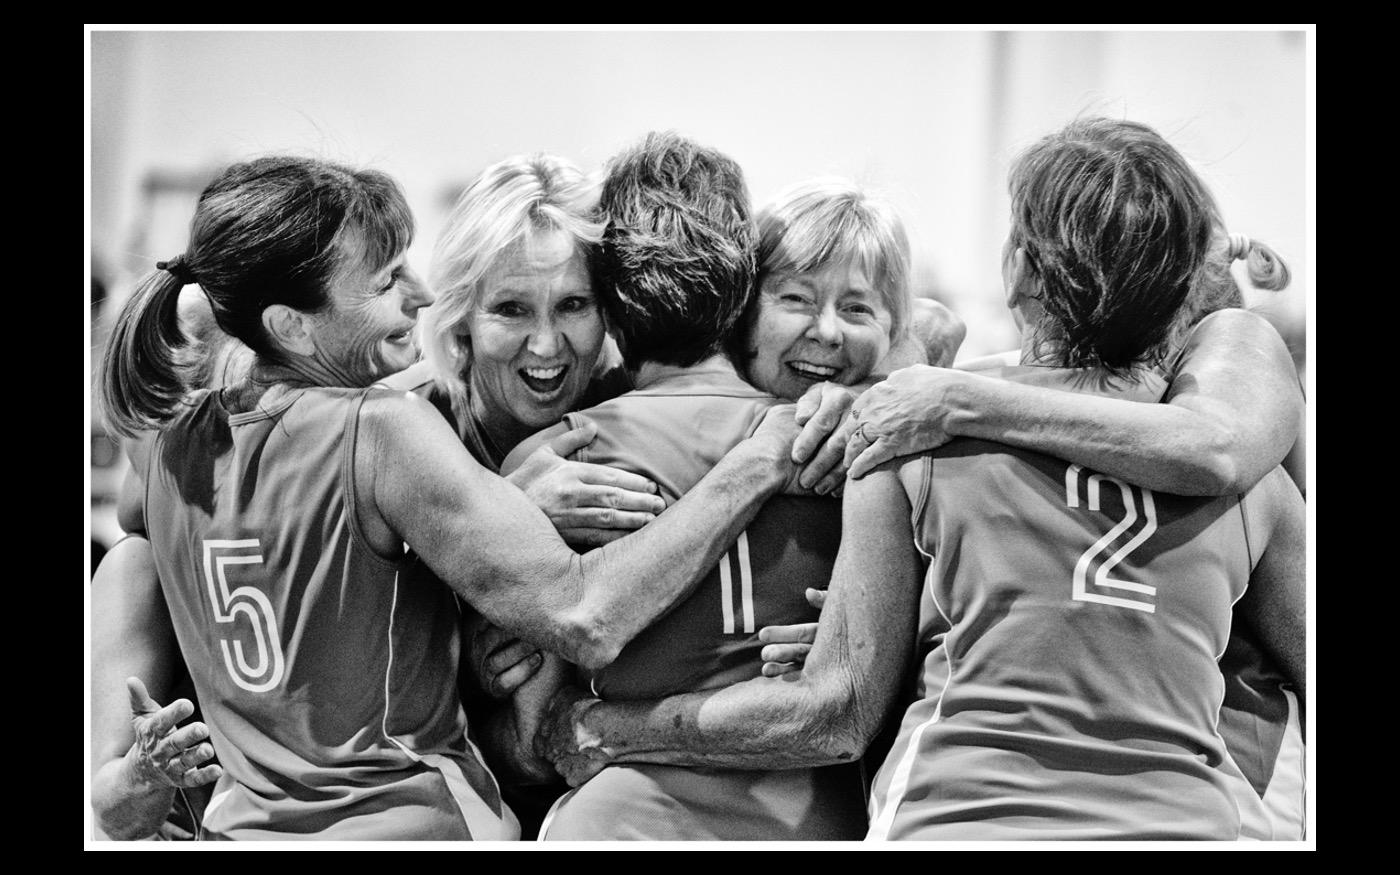 A very happy group of women volleyballers   Huntsman Senior Games 2019 : Looking Back: 60 Years of Photographs : David Burnett | Photographer